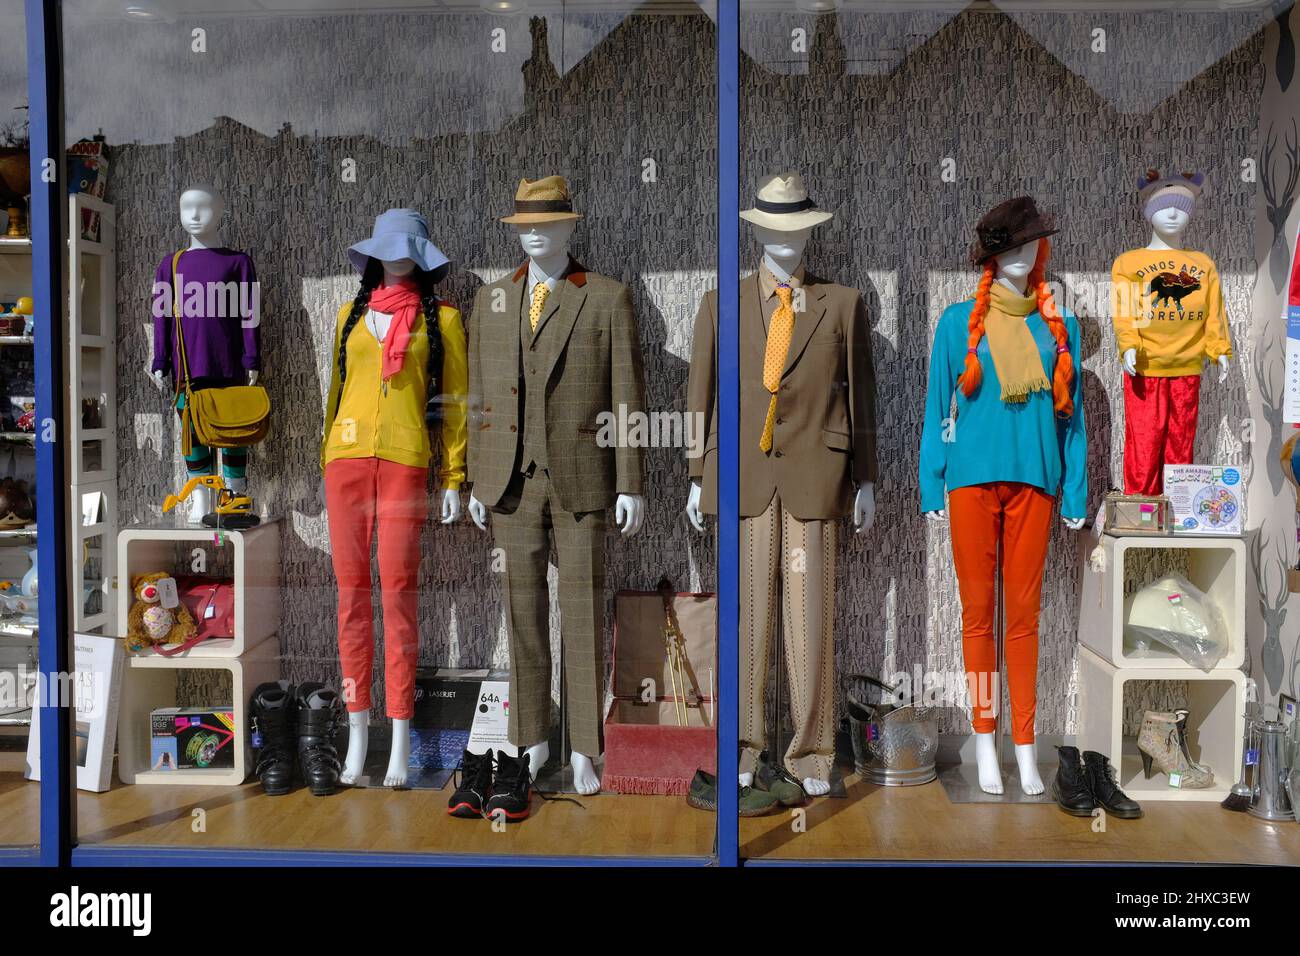 A very brightly dressed charity shop window. Stock Photo